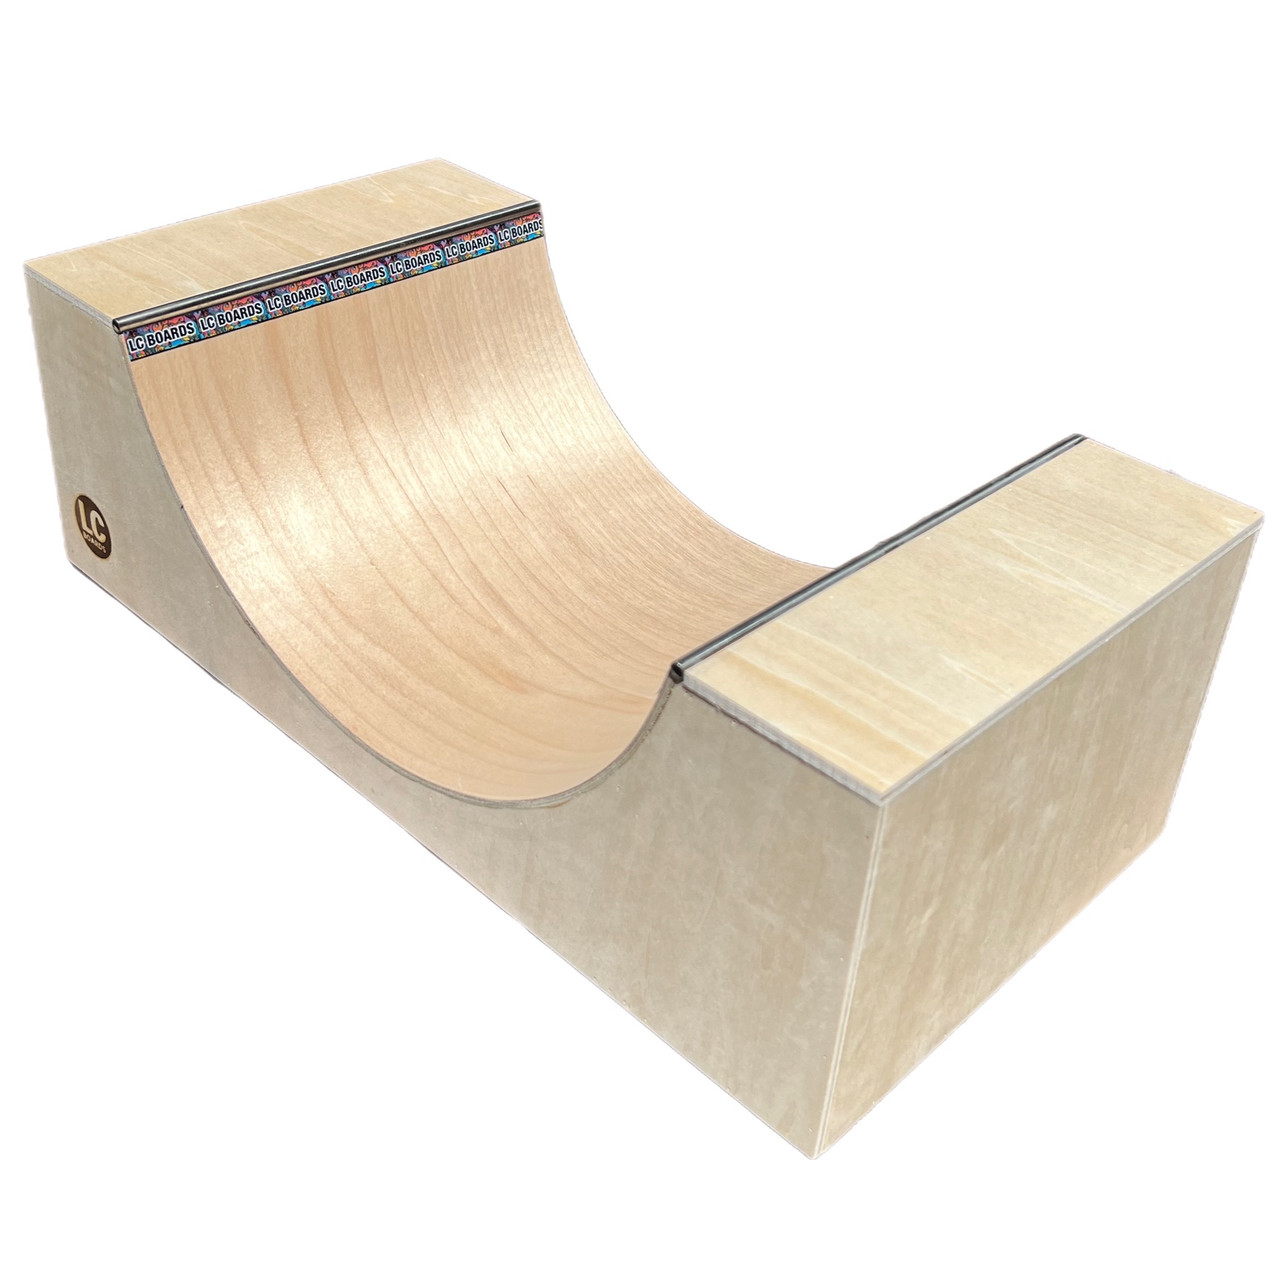 LC Boards Fingerboards